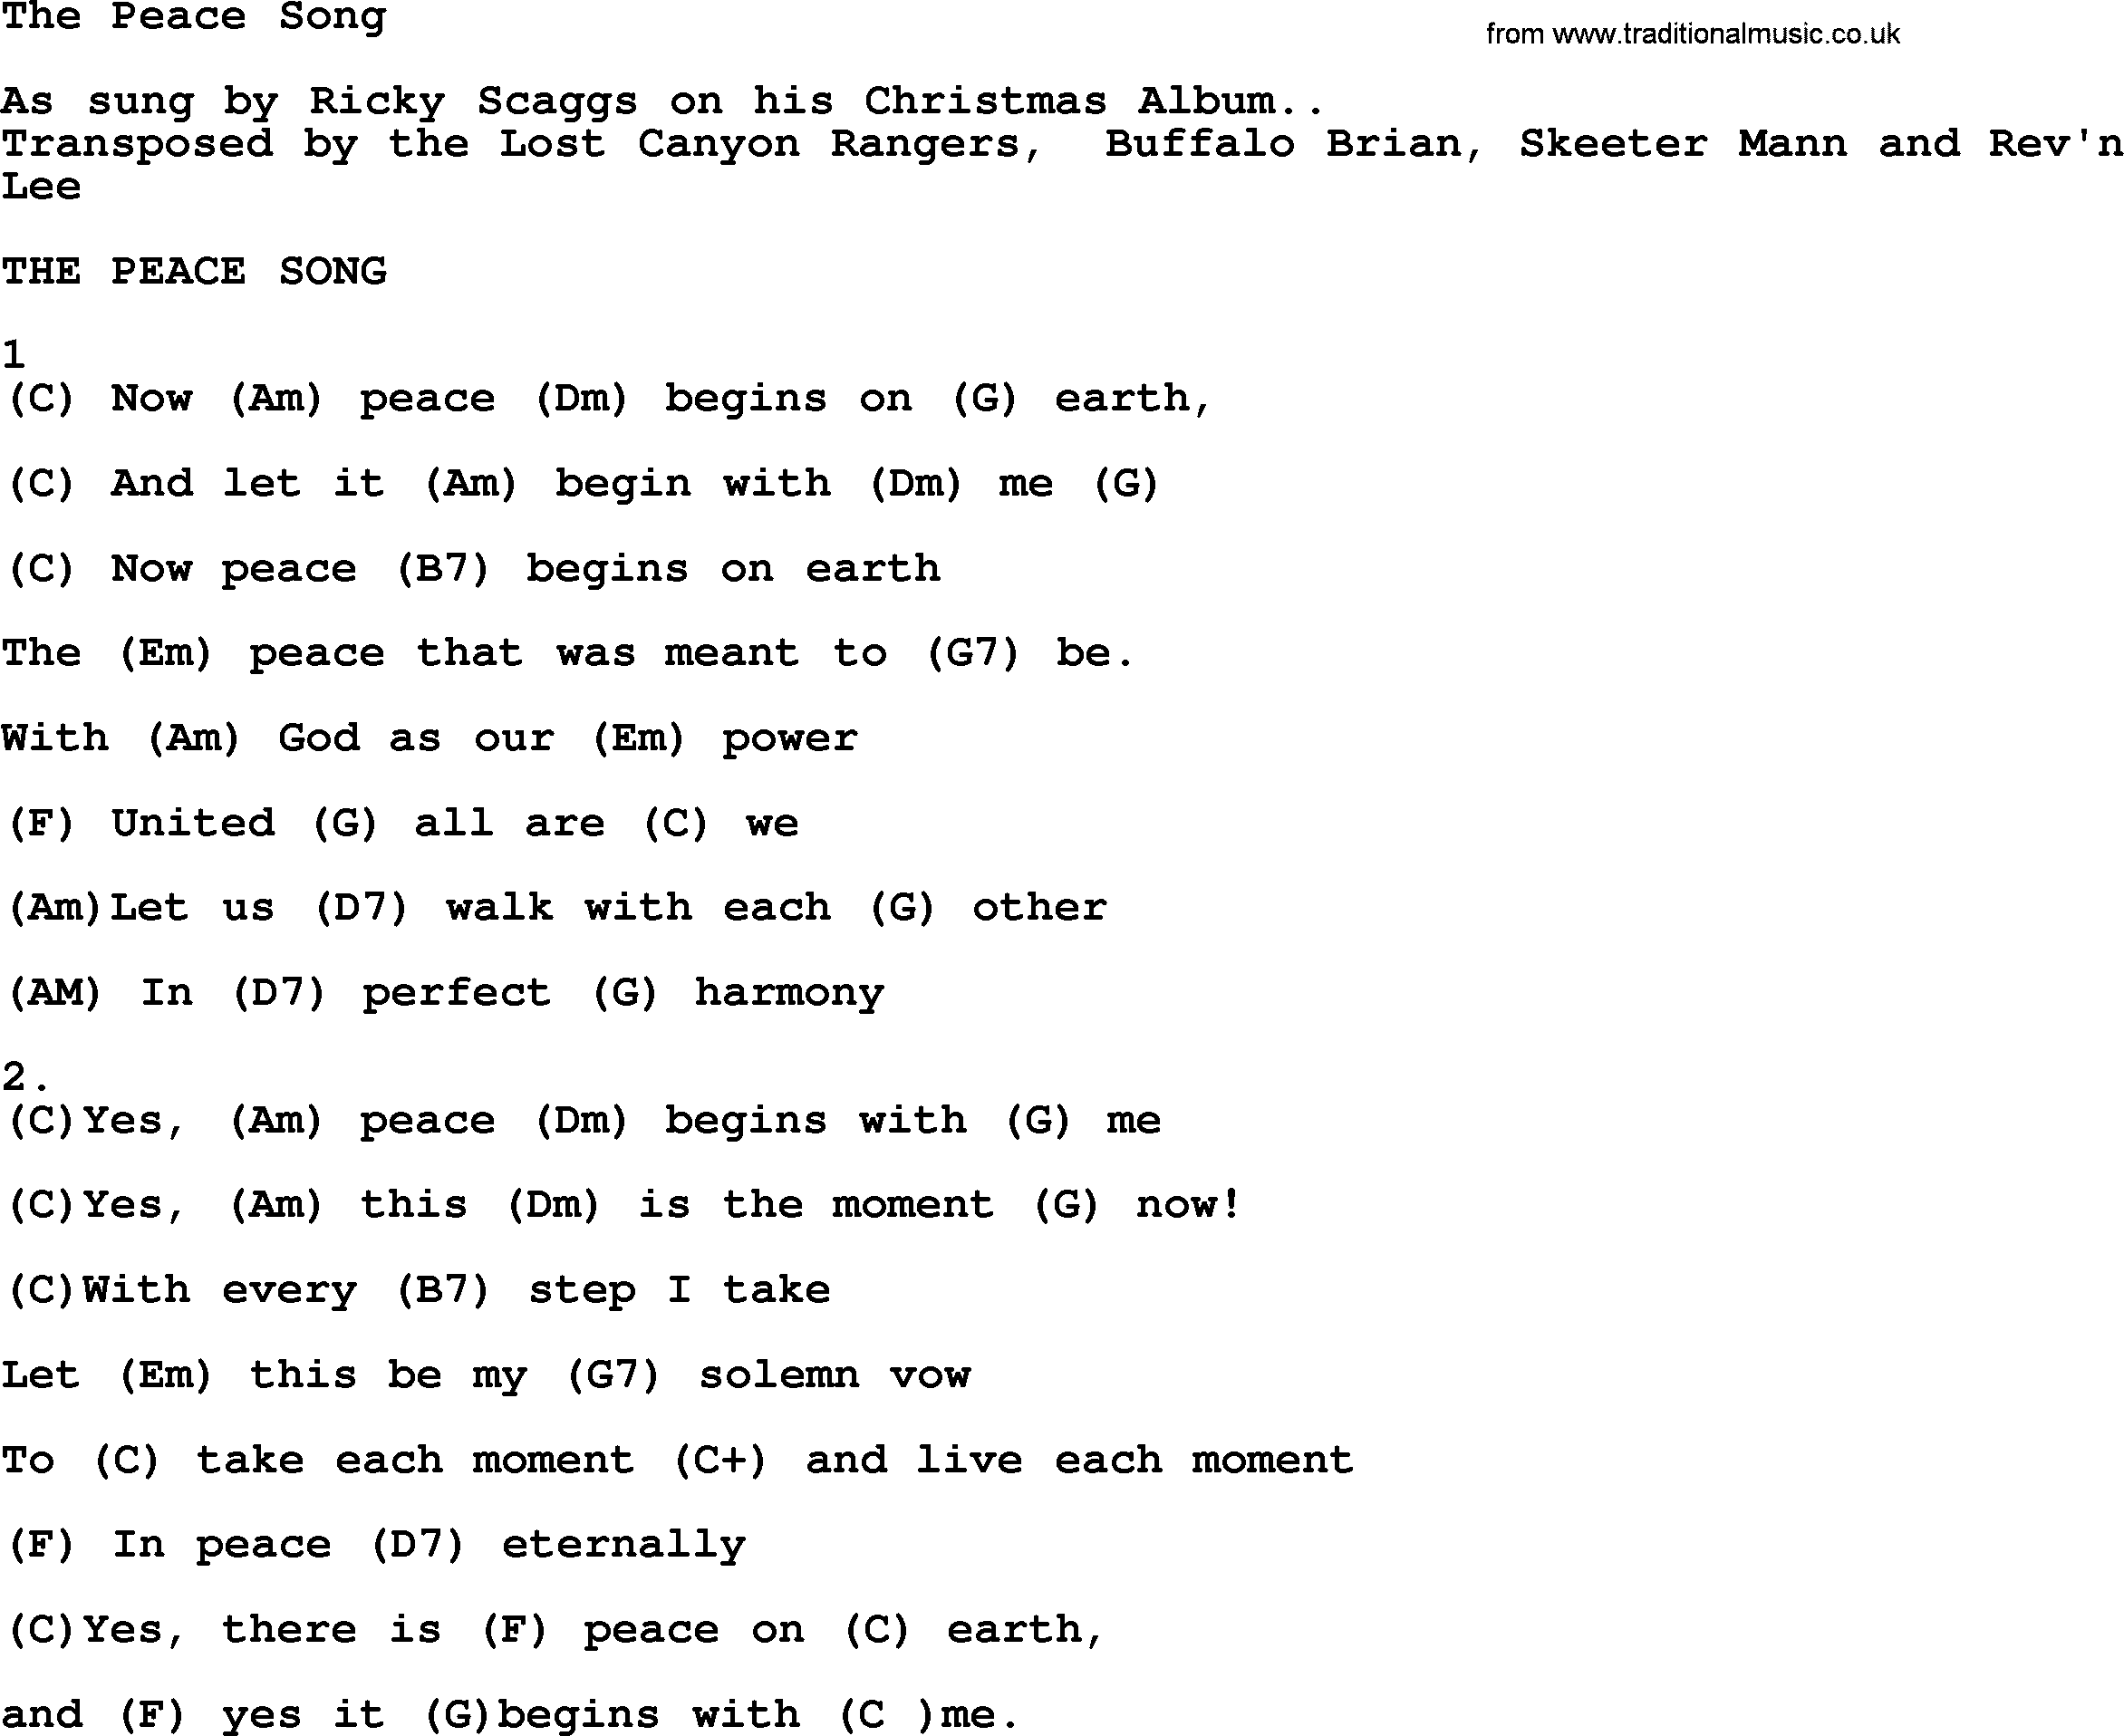 Bluegrass song: The Peace Song, lyrics and chords